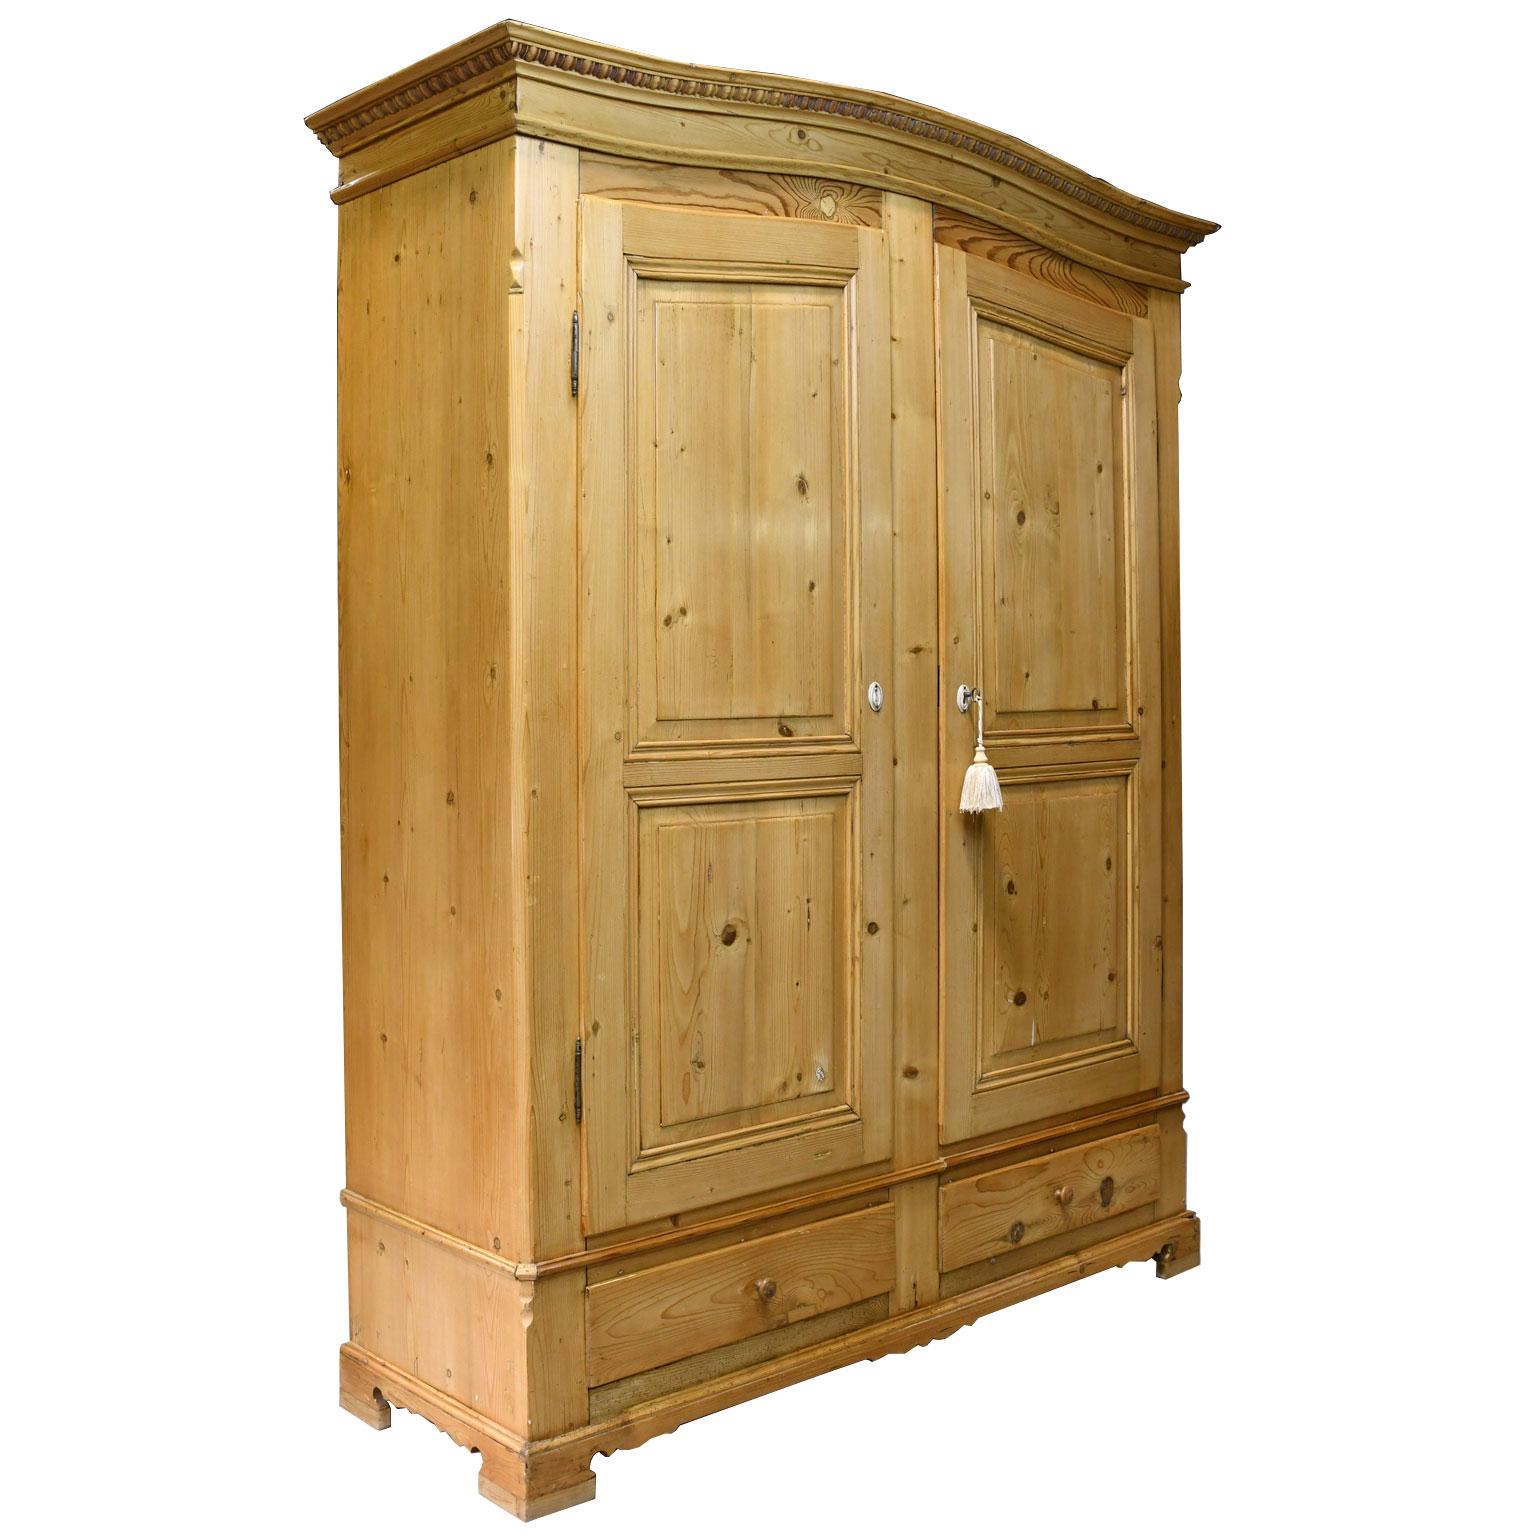 A beautiful armoire in light-colored pine with arched bonnet embellished with a carved cornice, two arched doors on outside hinges, with two raised panels on each door, and a center divide between them. Armoire has two bottom drawers and rests on a